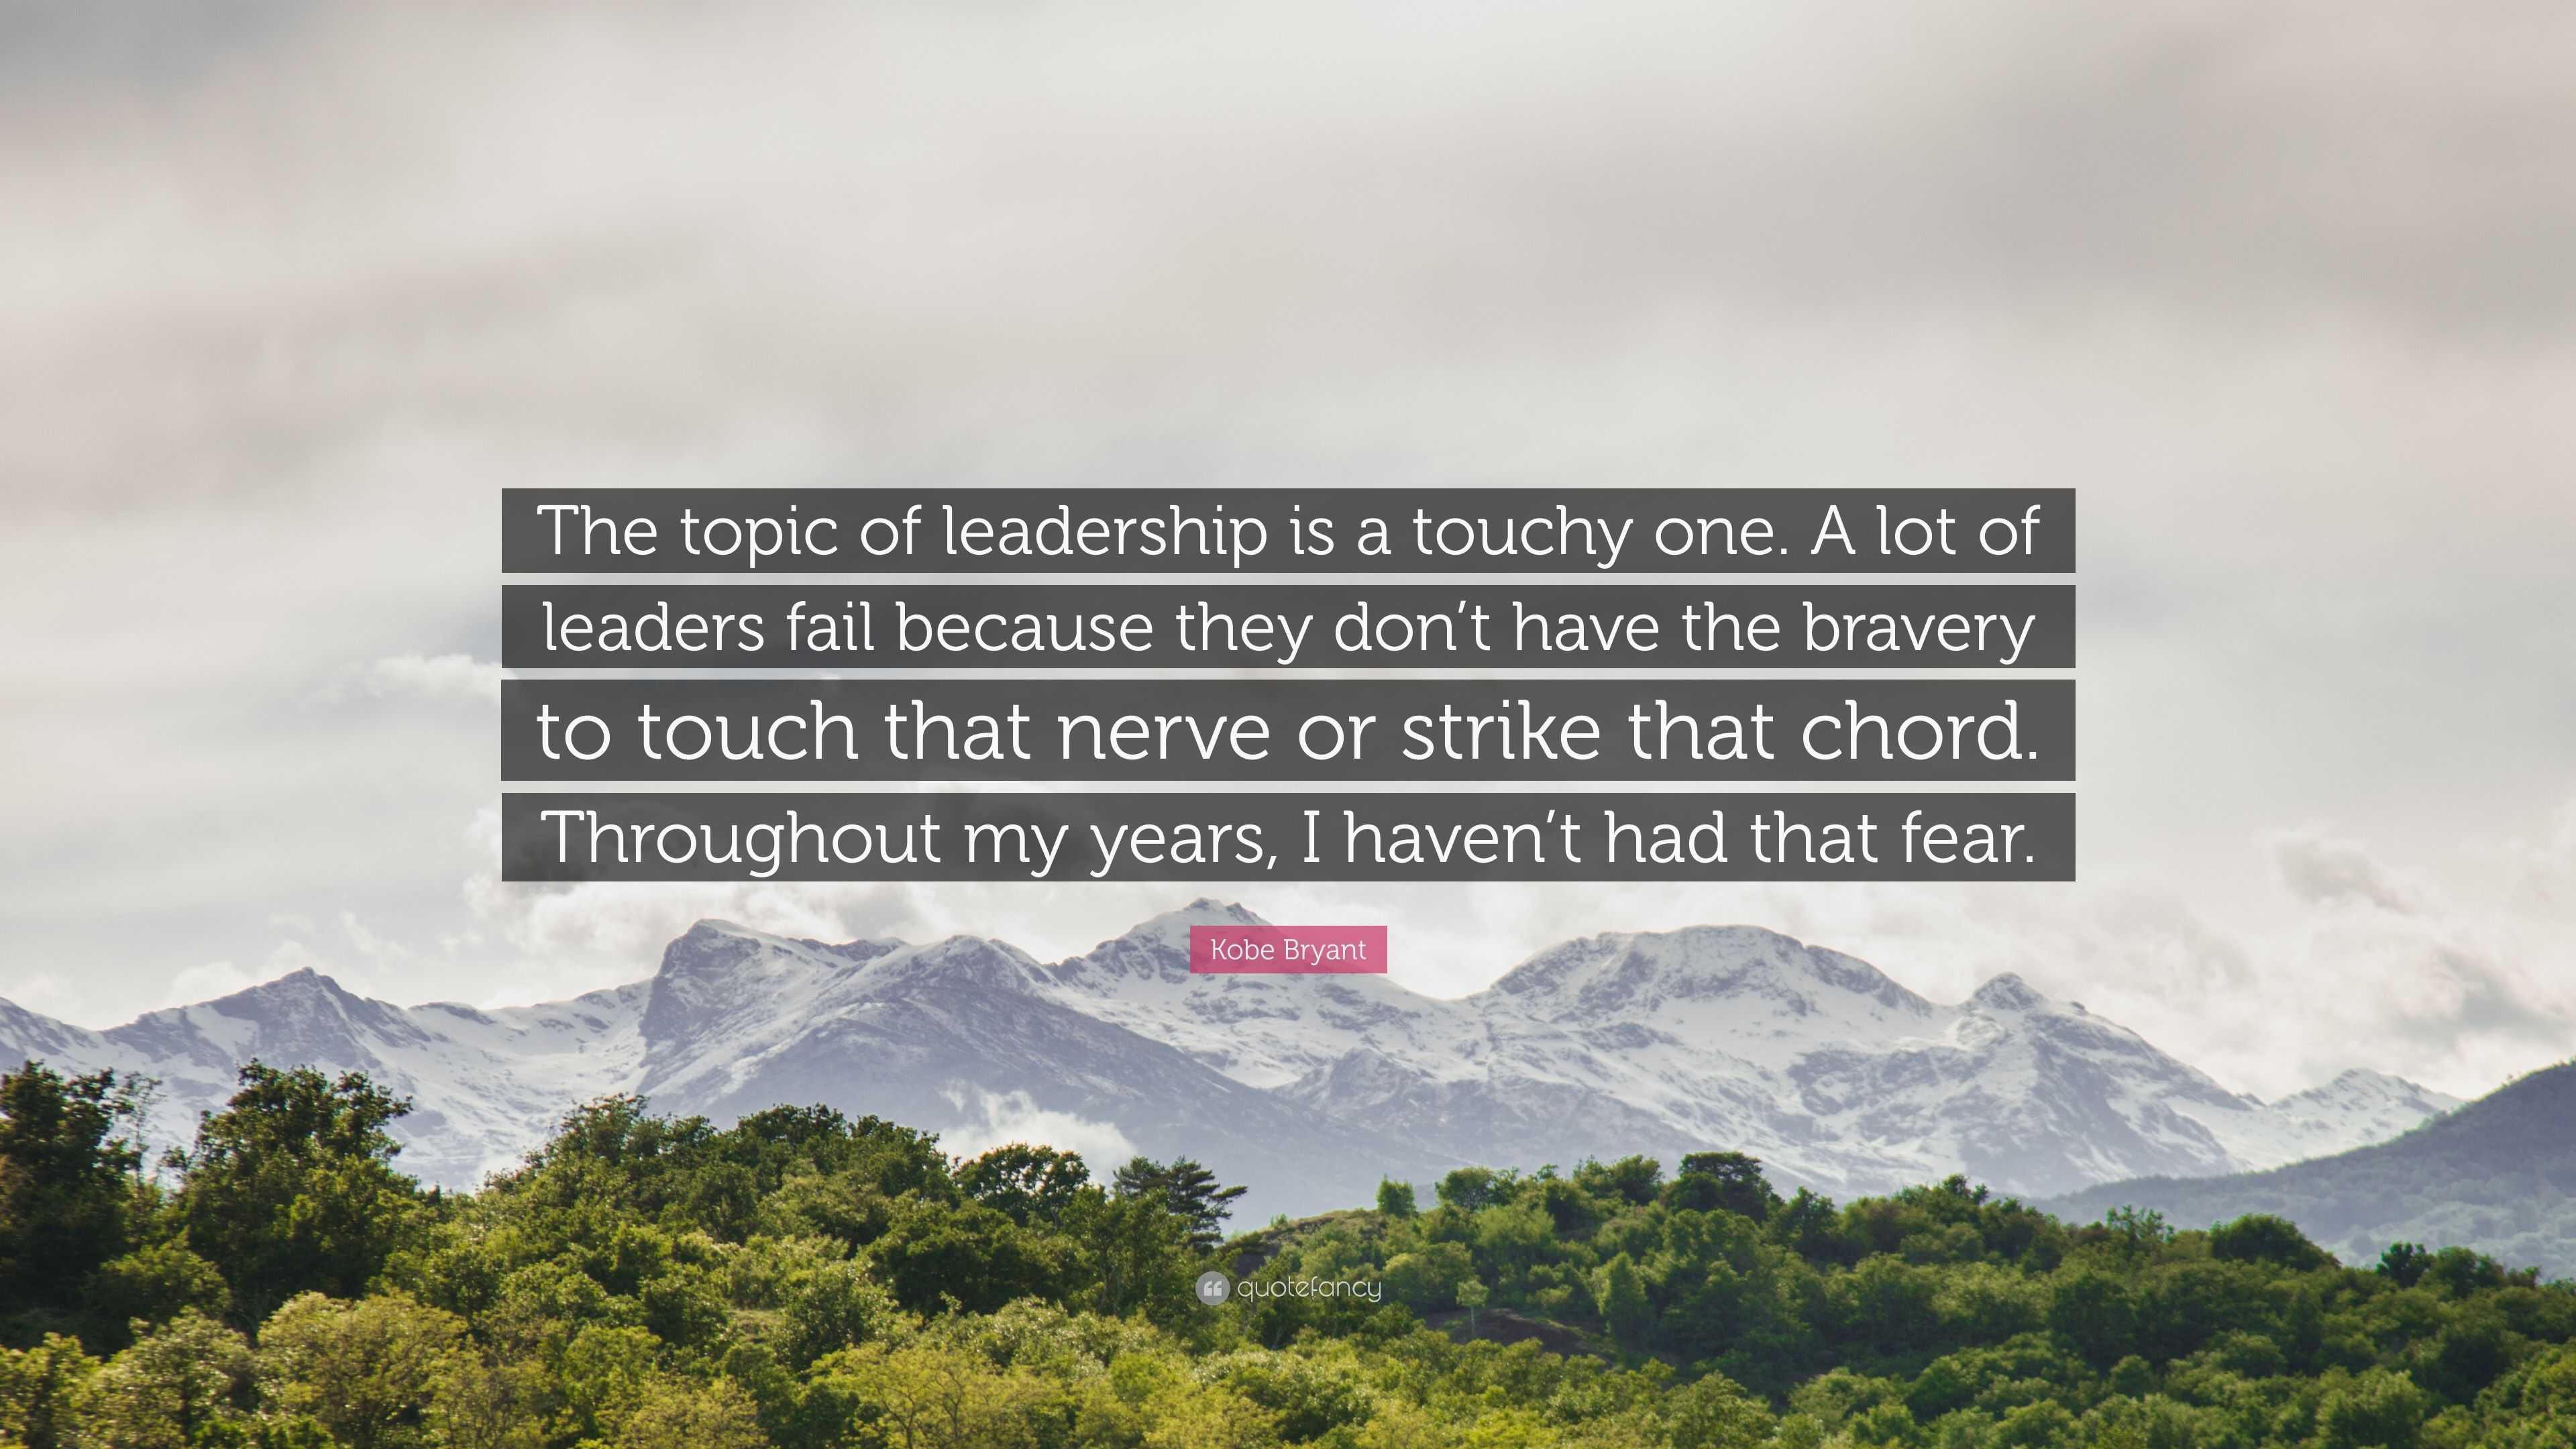 The topic of leadership is a touchy Canvas print Motivation Quote Kobe Bryant 